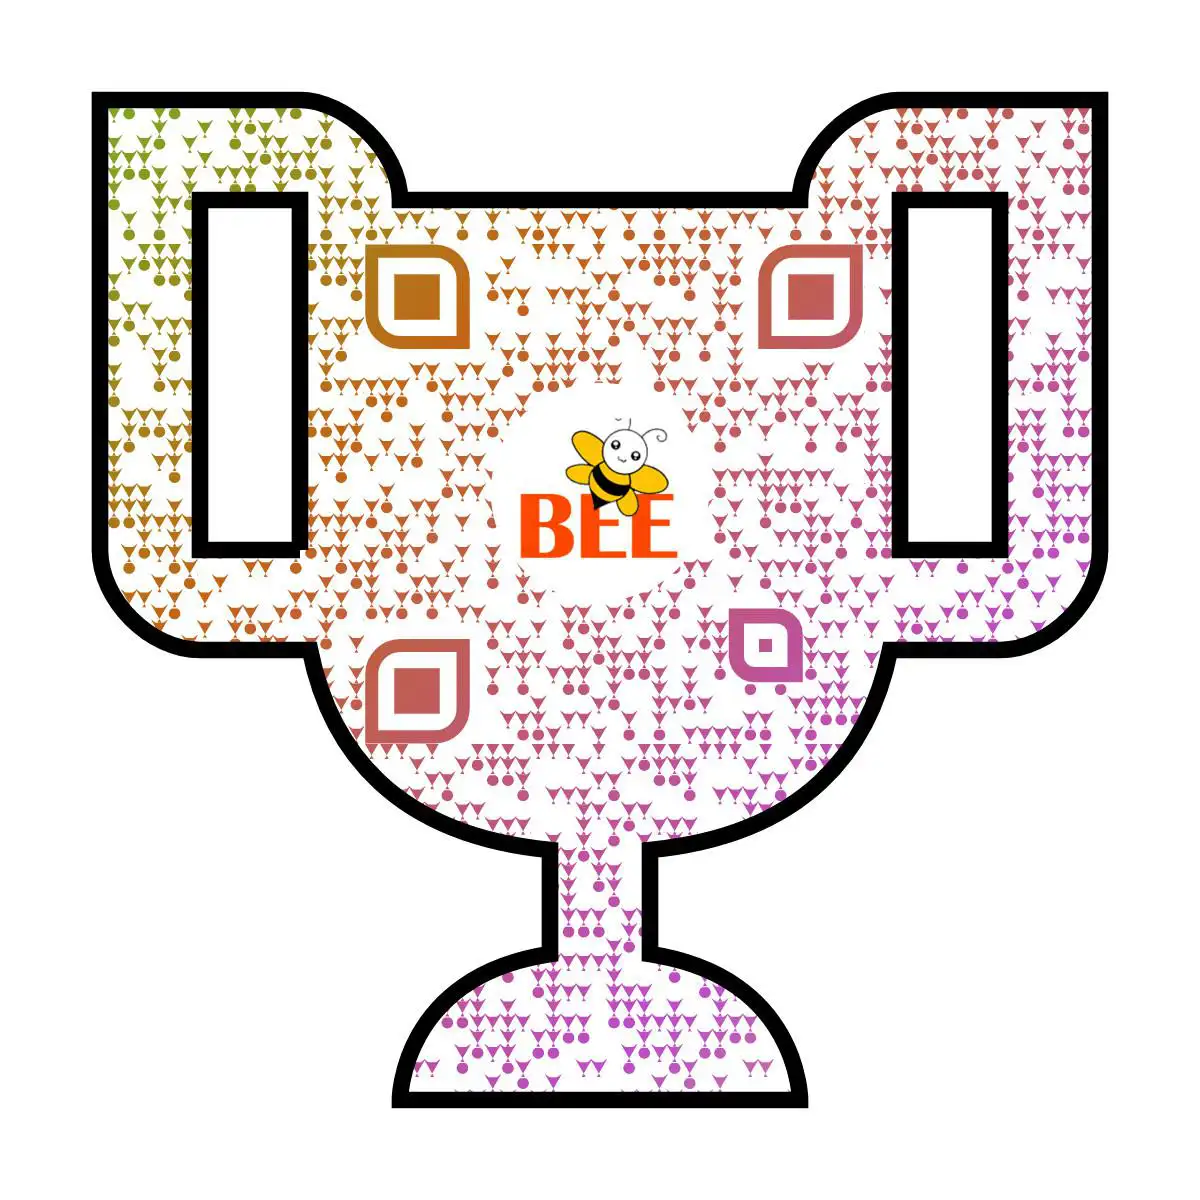 What is a QR code Everything about QR codes